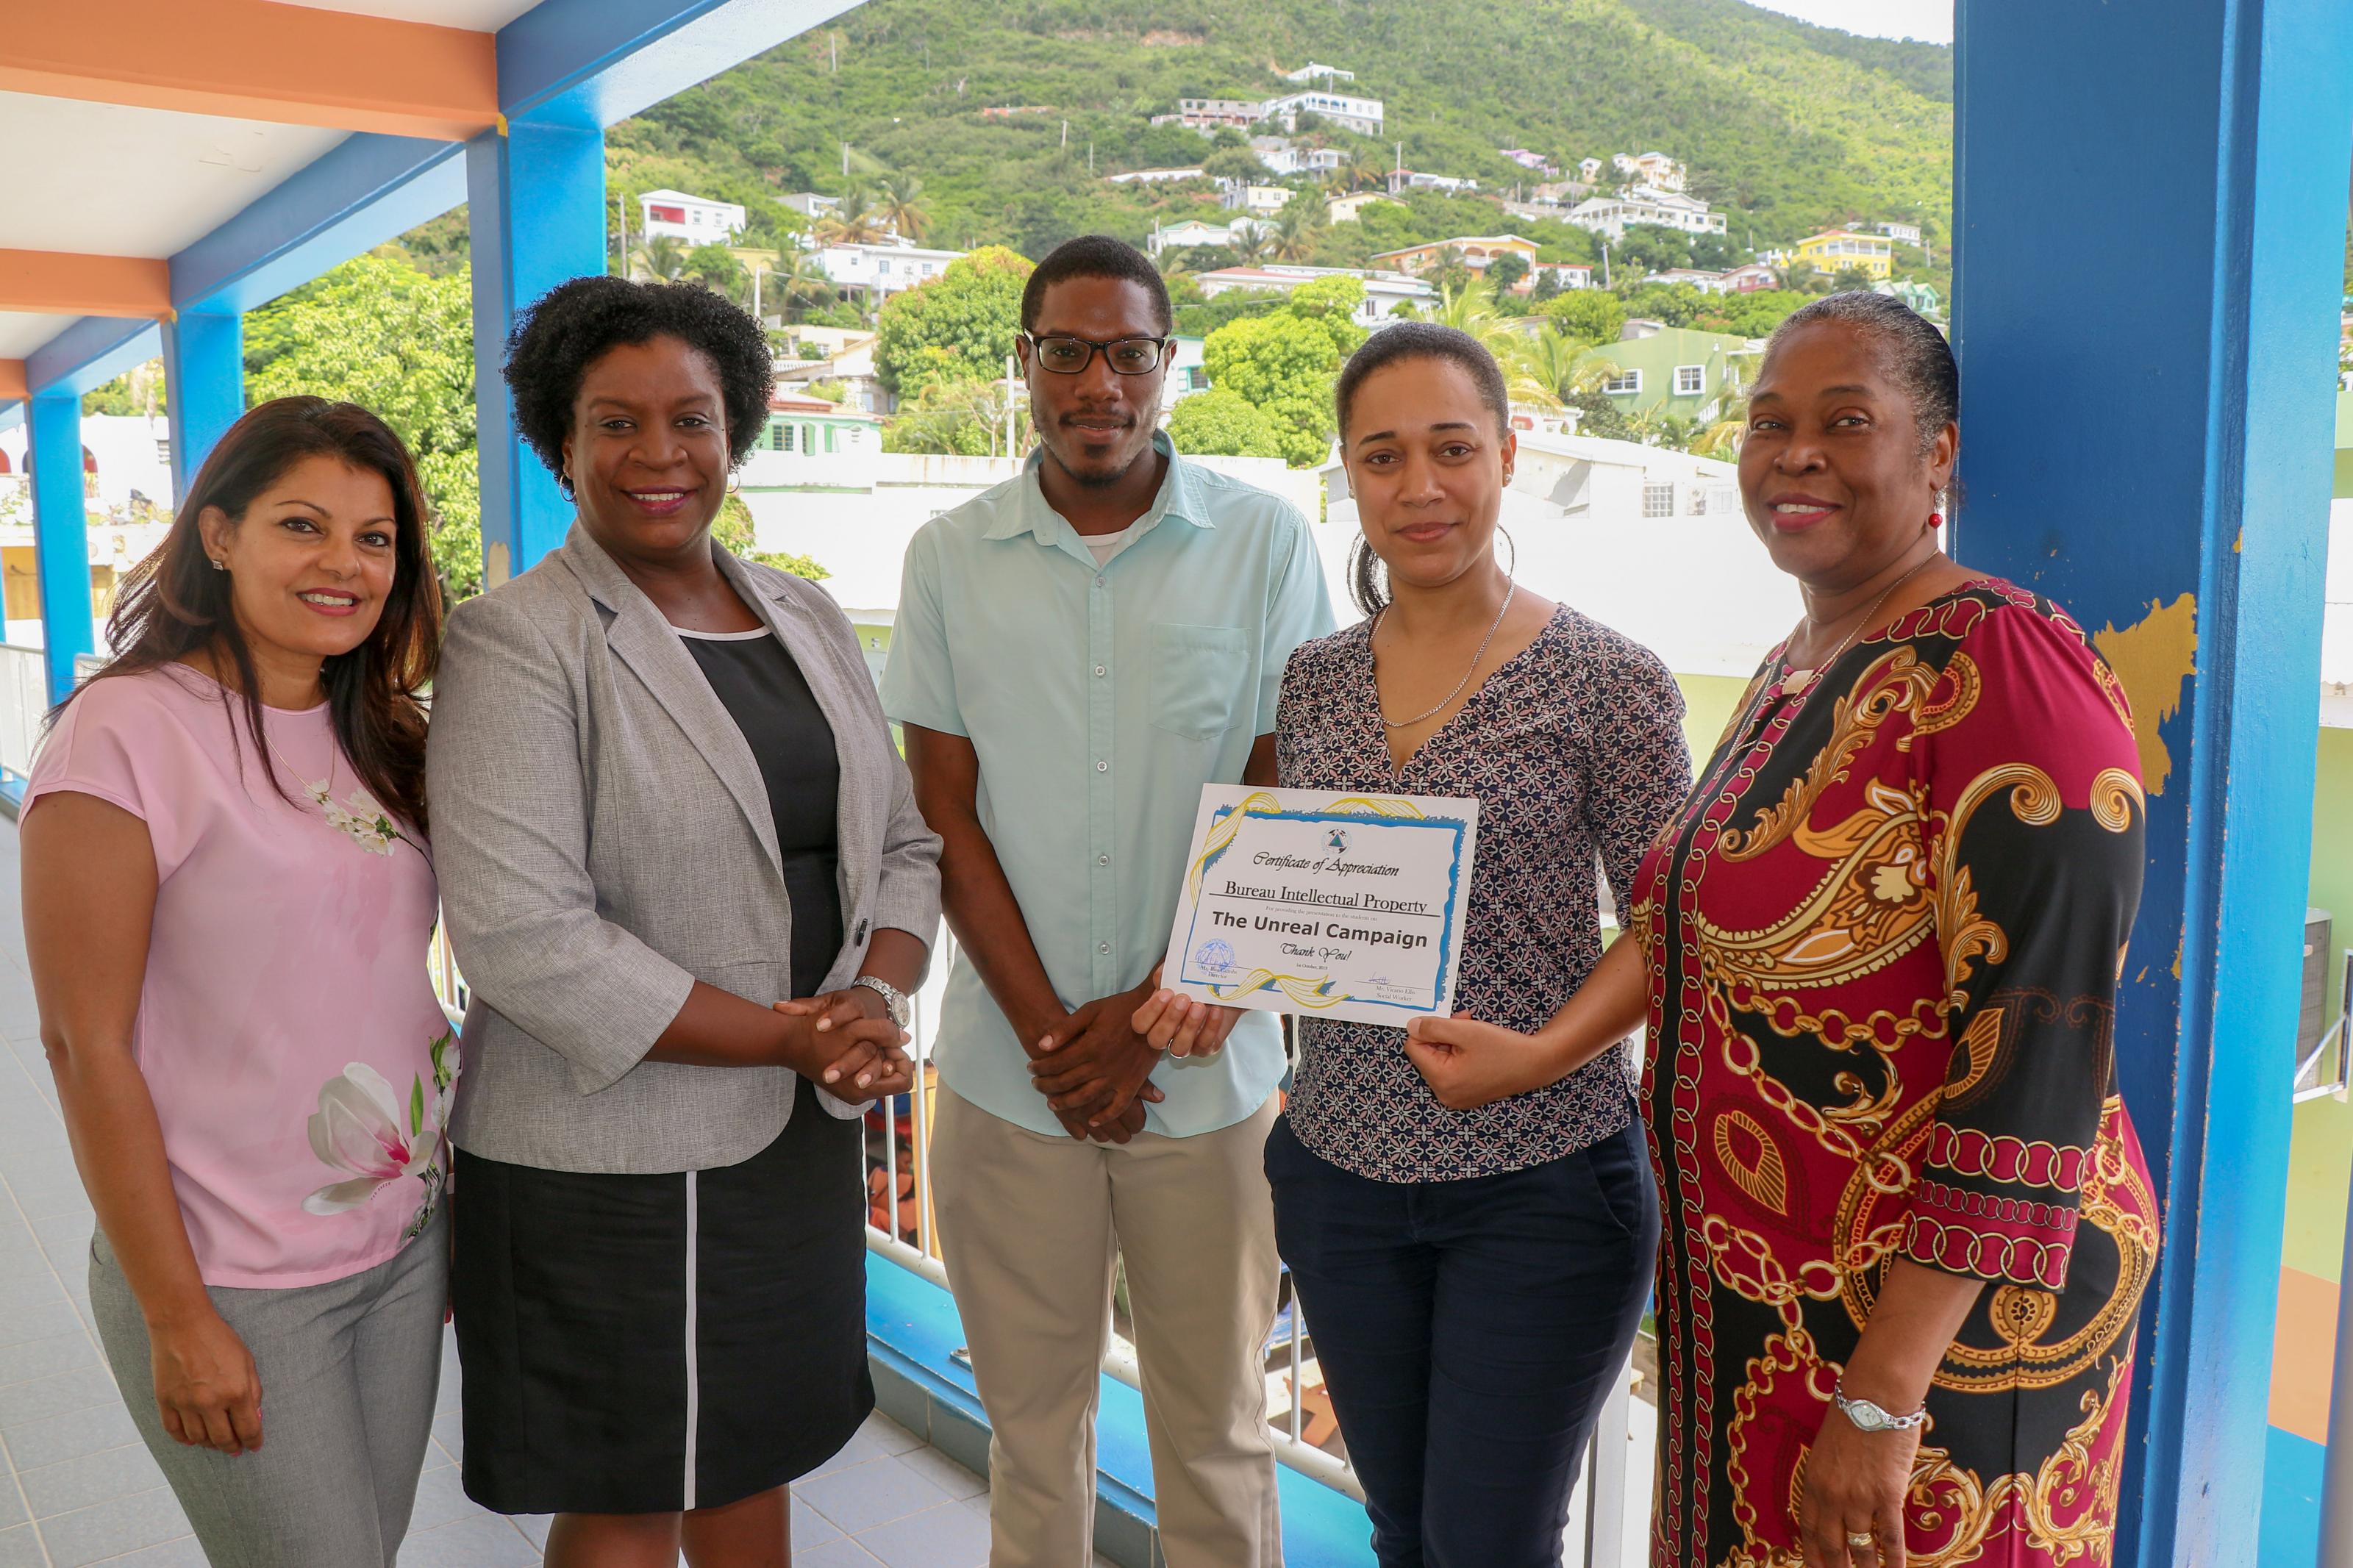 BIP SXM continues the unreal campaign at the Sint Maarten Vocational Training School